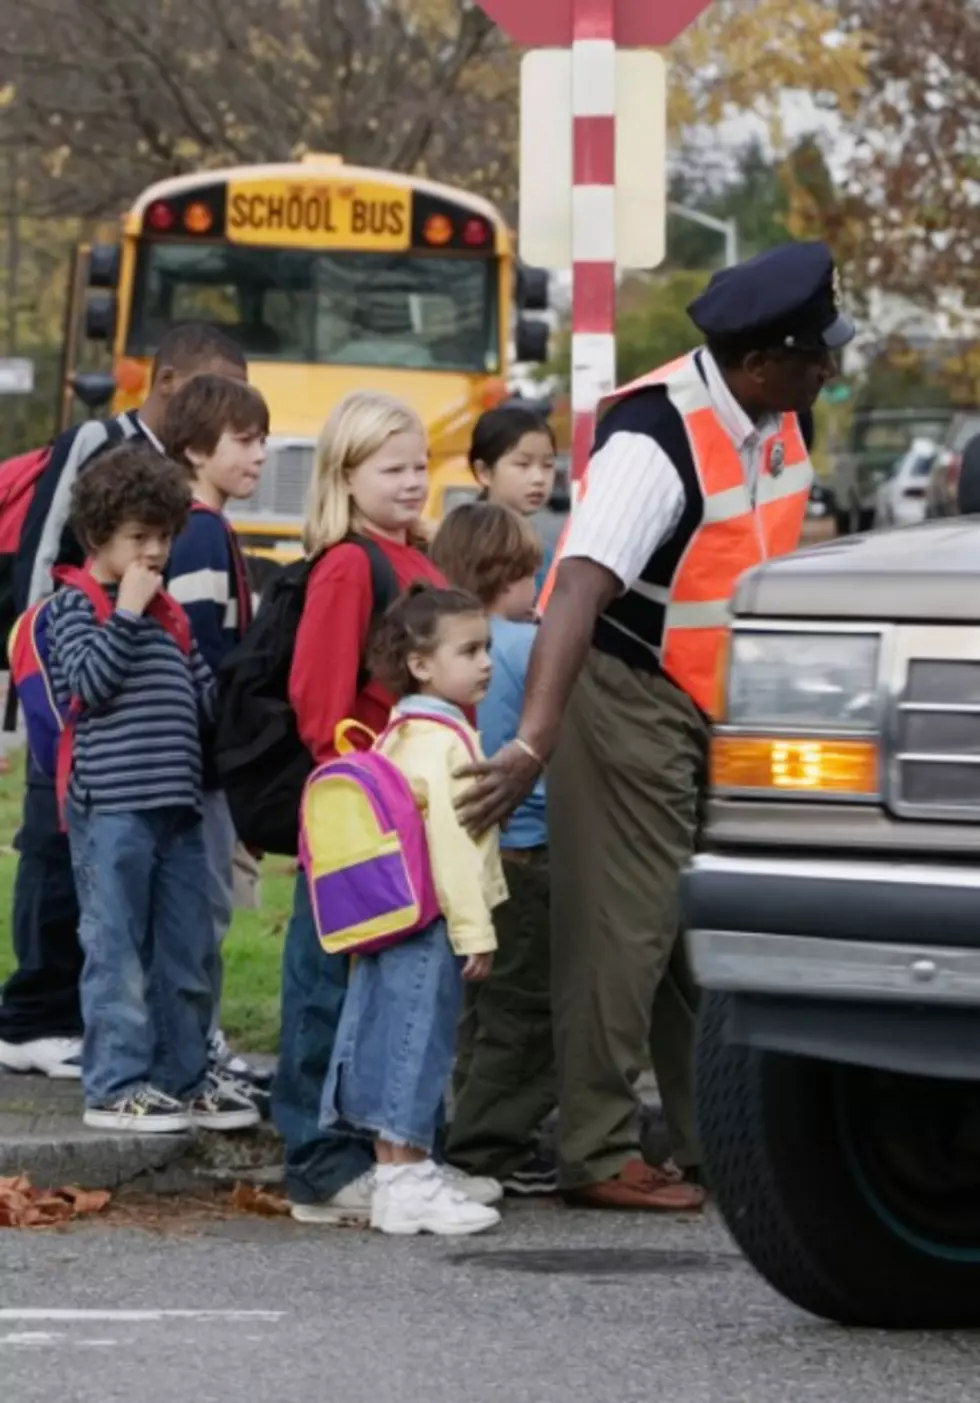 Saugerties Is Looking for School Safety Crossing Guards